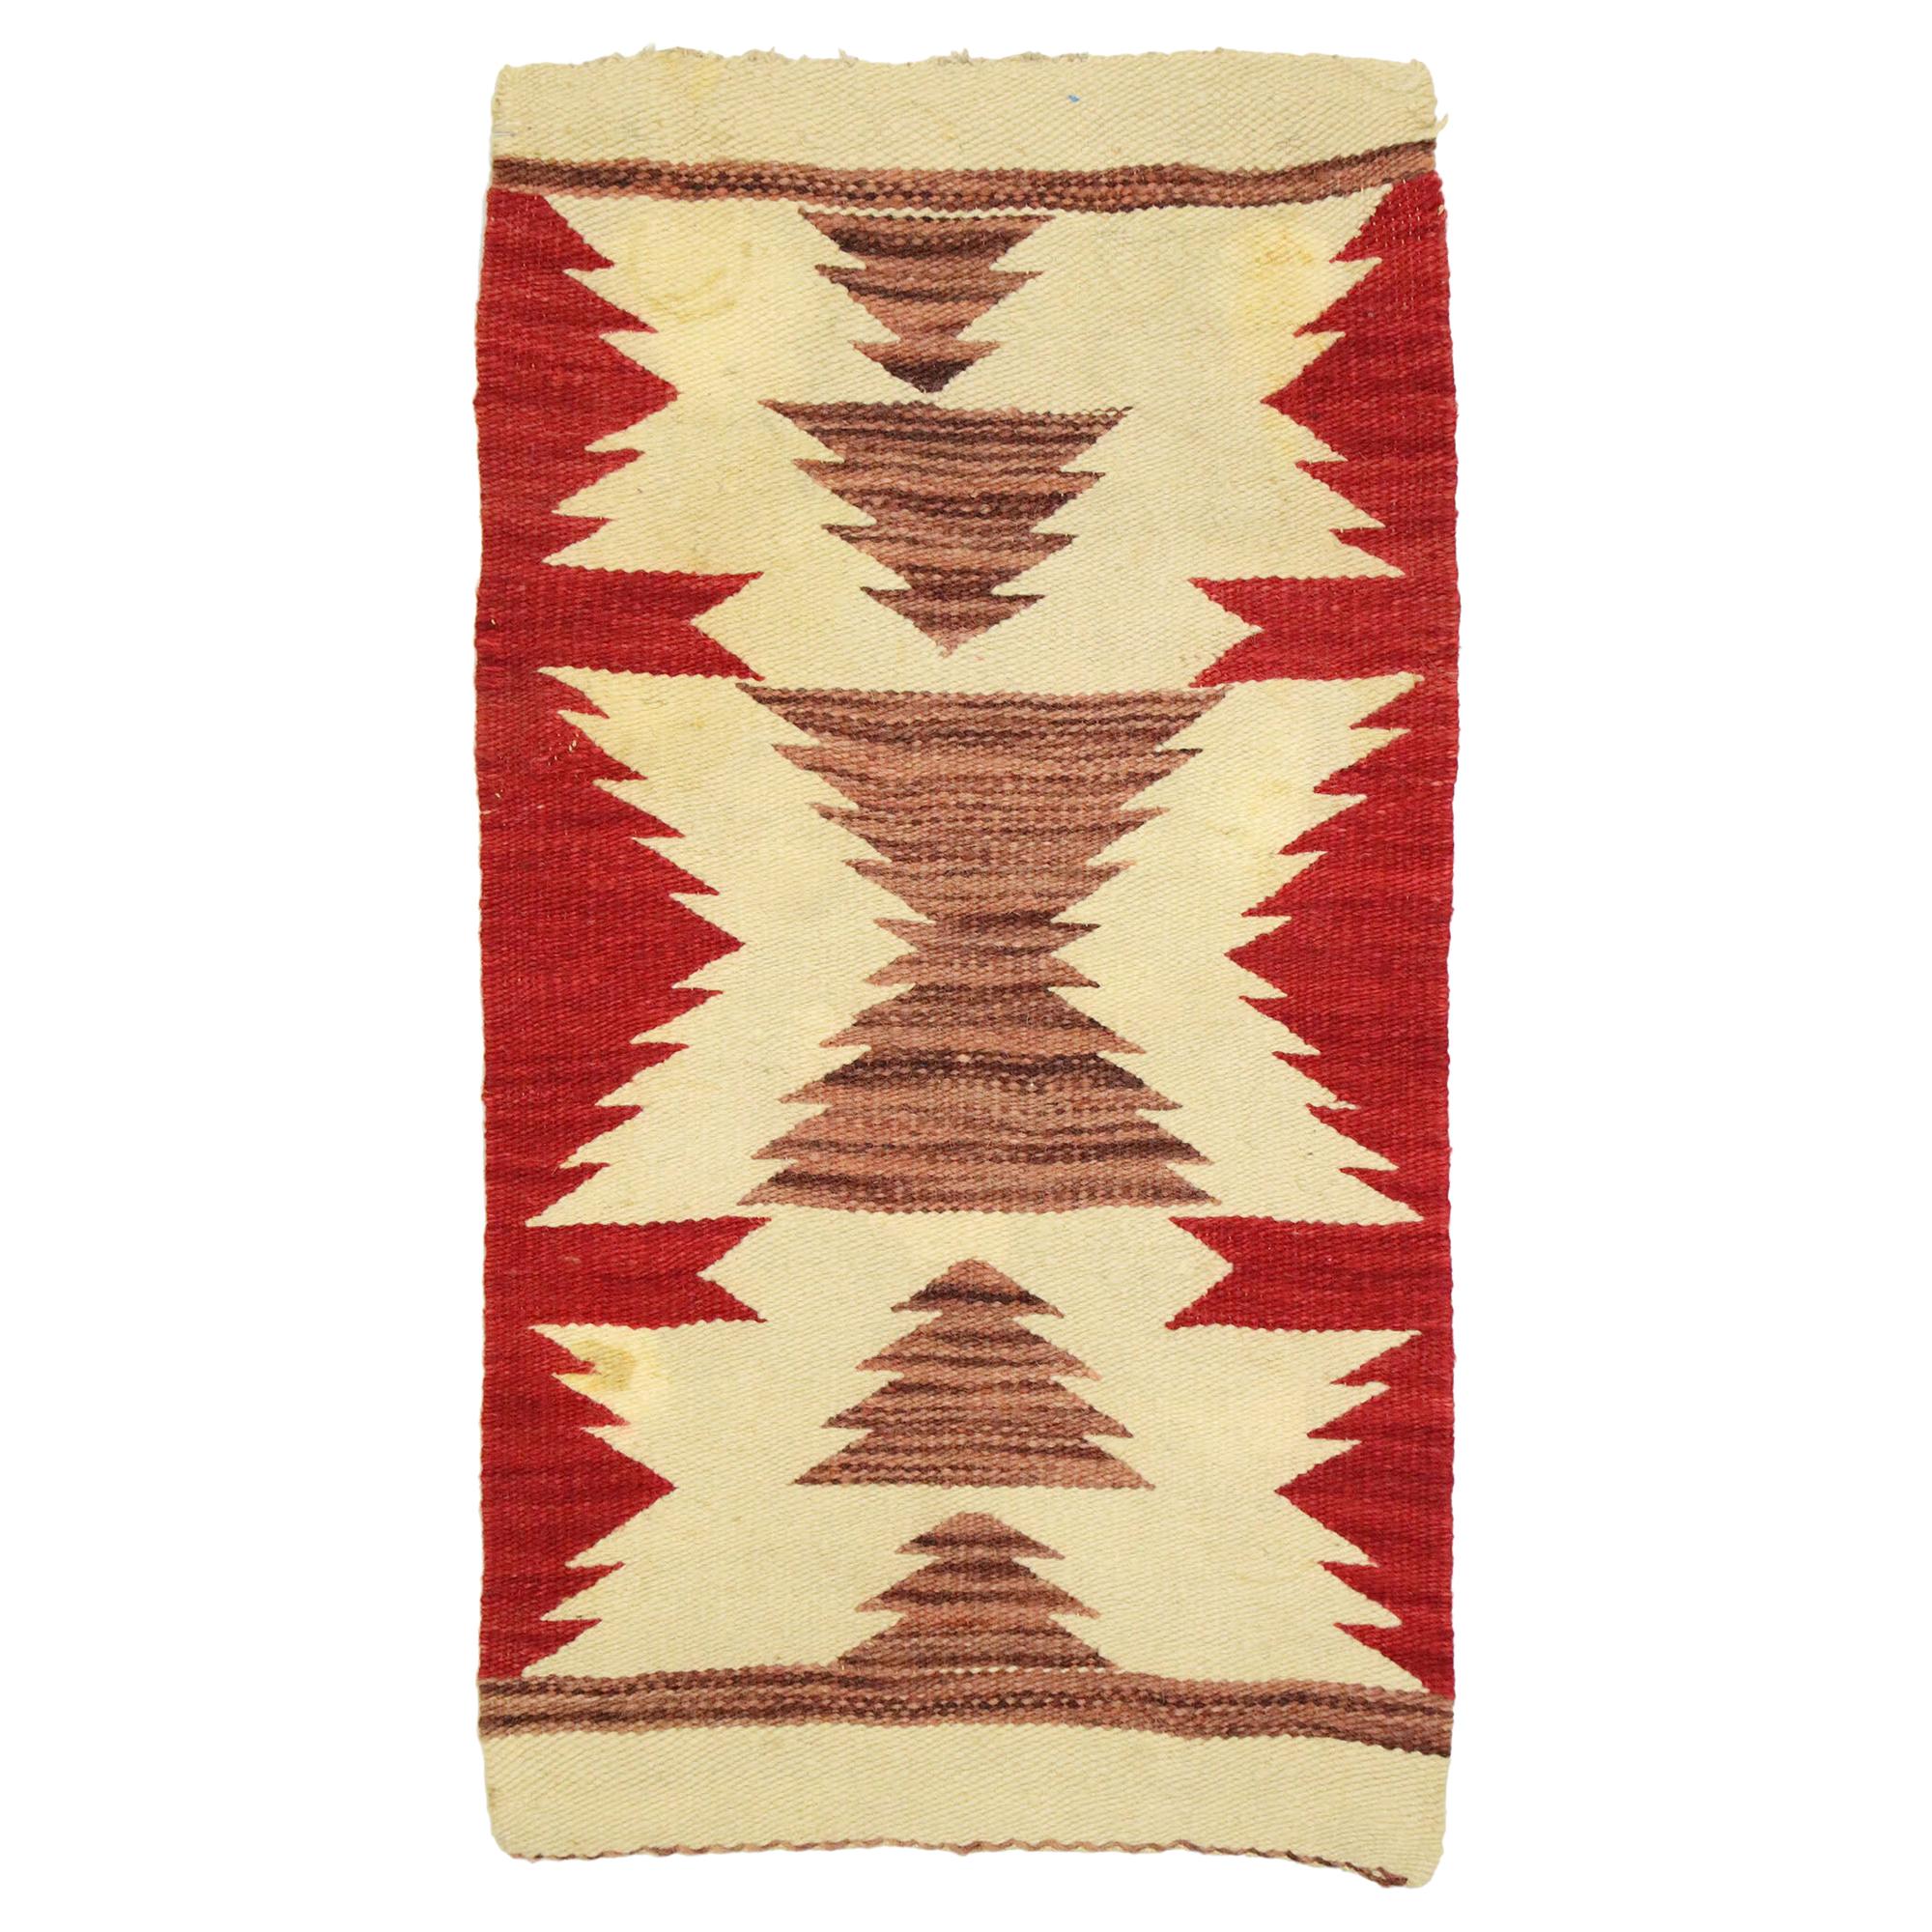 Native American Antique Kilim Rug with Navajo Two Grey Hills Style